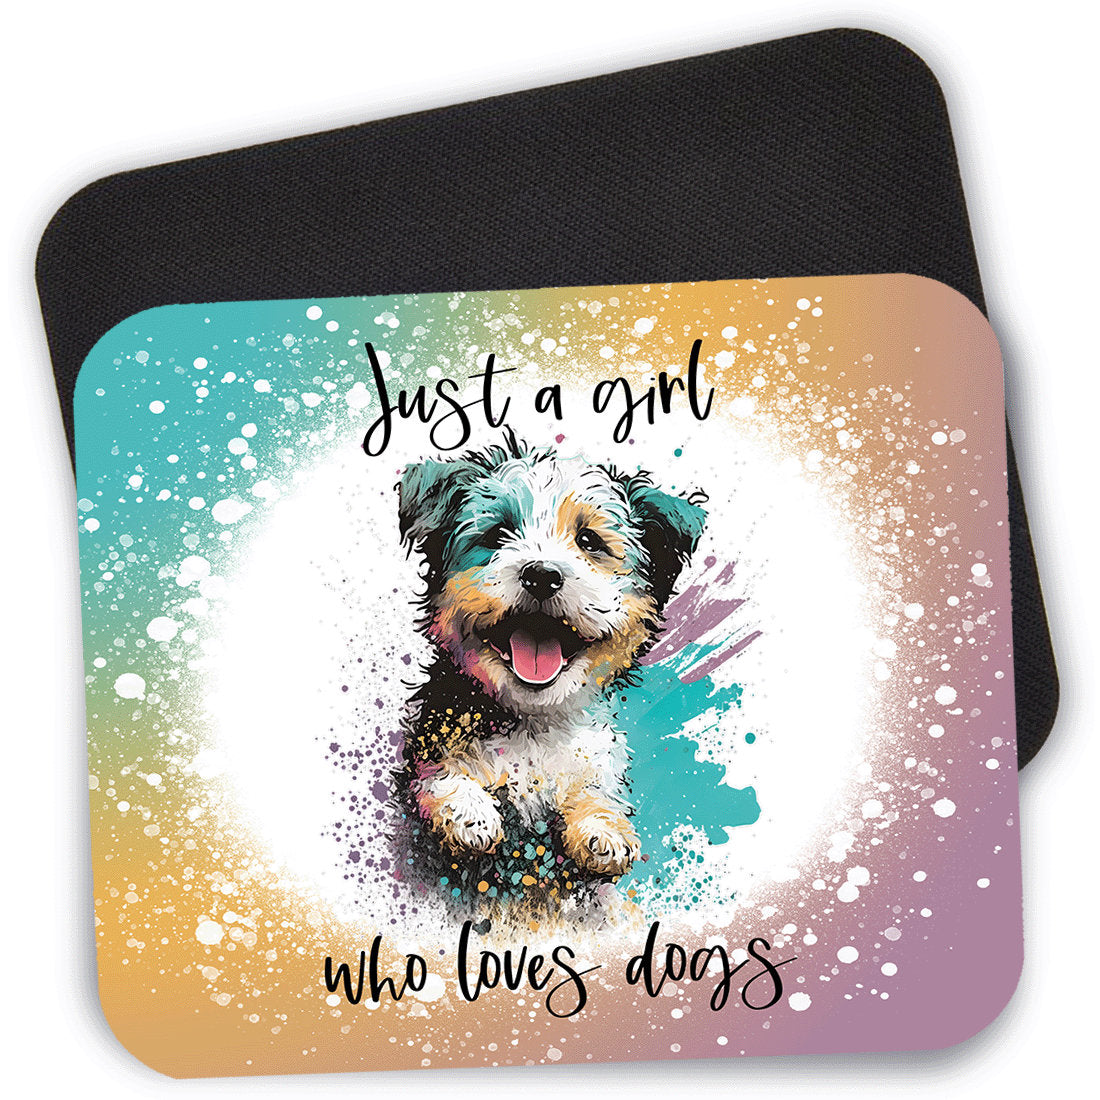 Just A Girl Who Loves Dogs Gamer Mouse Pad, 9.4" x 7.9" Large Desk Pad, Cute Mouse Pad, Dog Mom Gift, Computer Desk Mouse Pad, Mouse Mat,